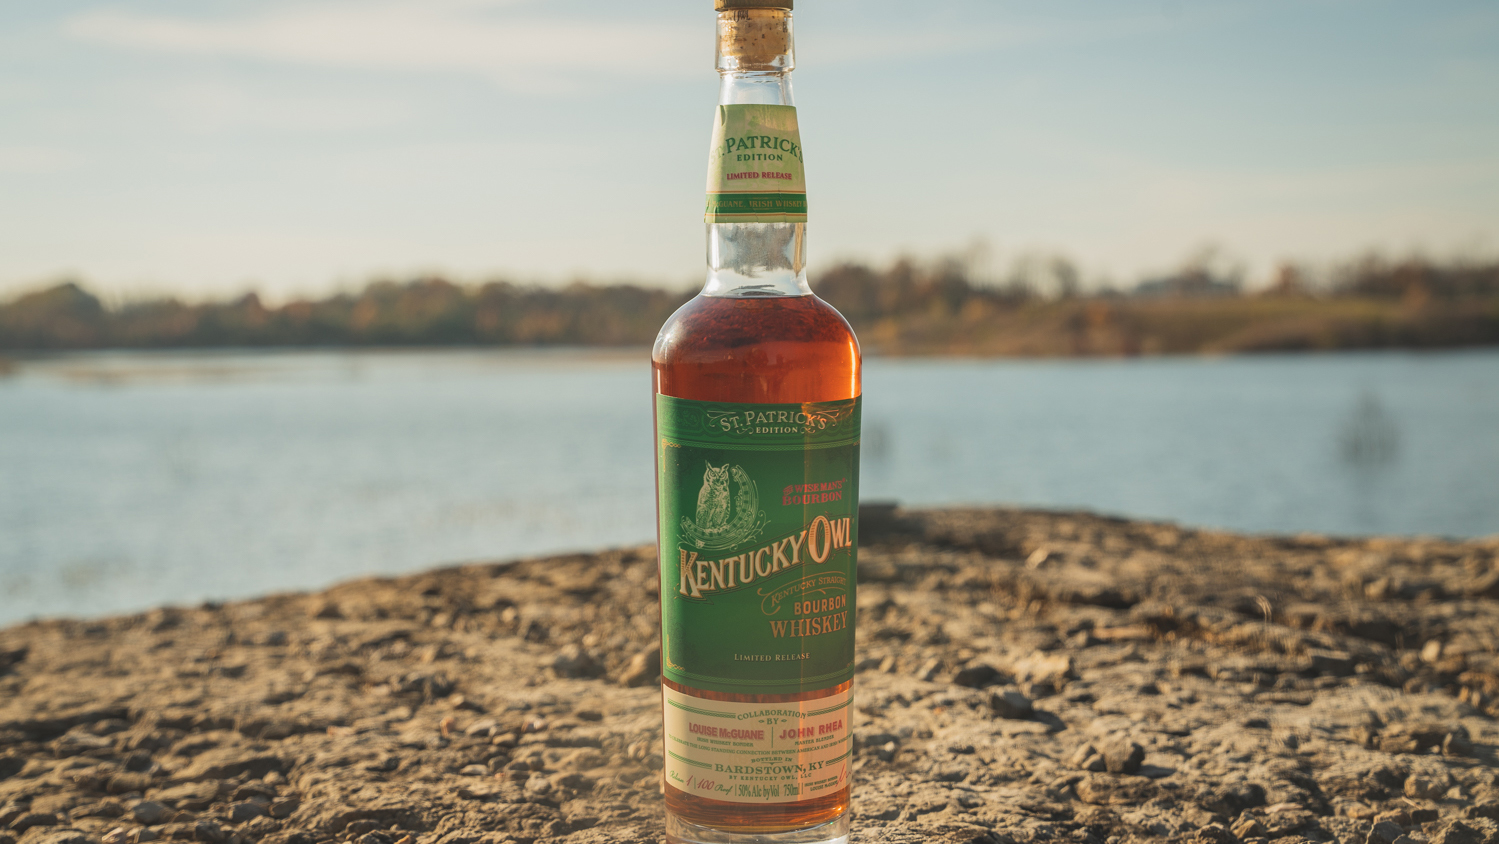 Kentucky Owl St. Patrick's Limited-Edition Bourbon feature